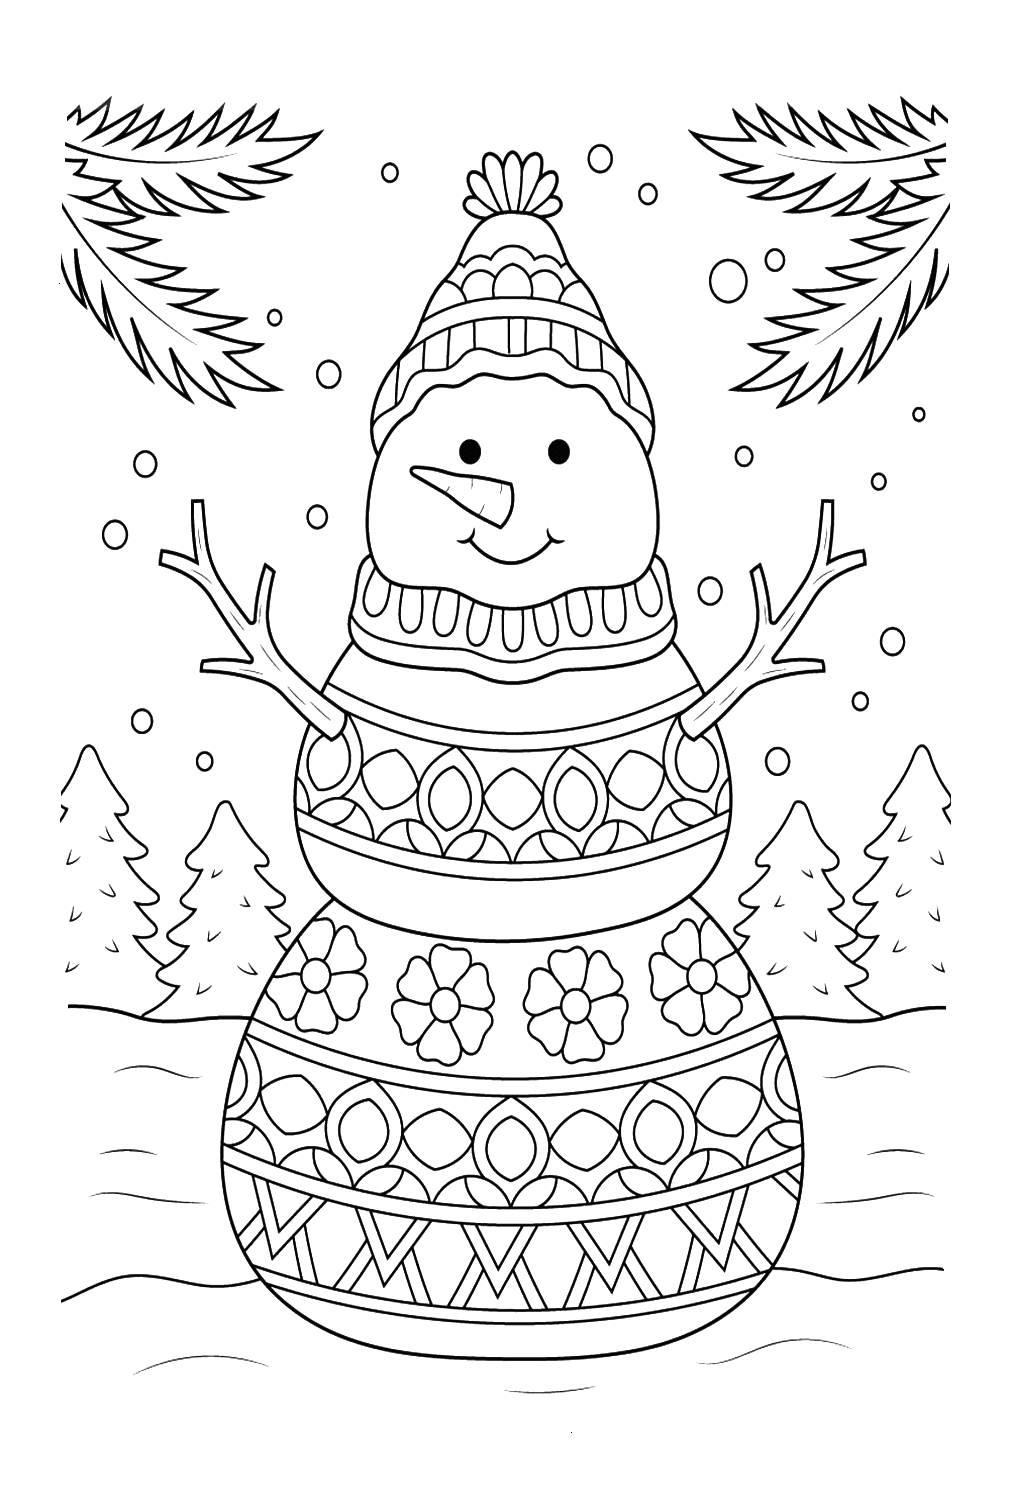 Snowman Coloing Pages For Adults